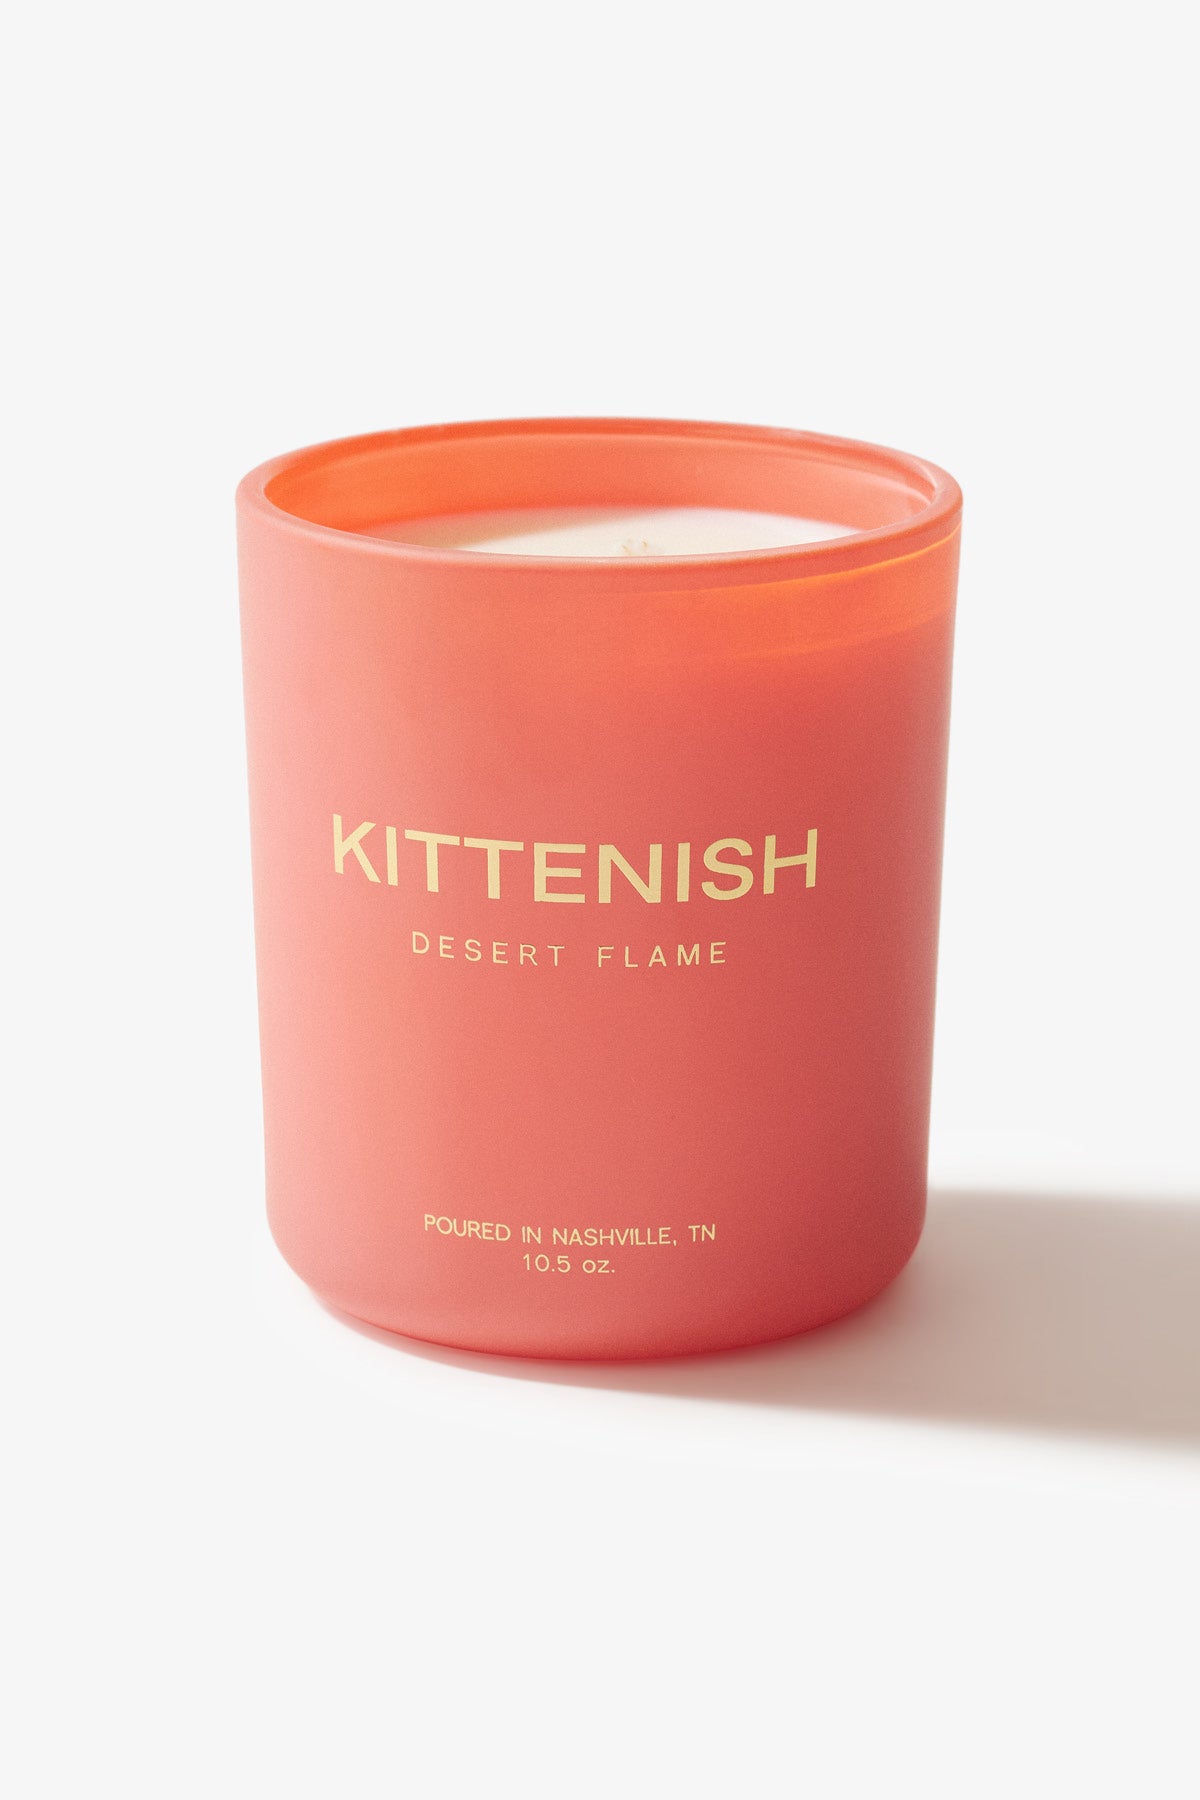 Rose Color Kittenish Candle - Desert Flame